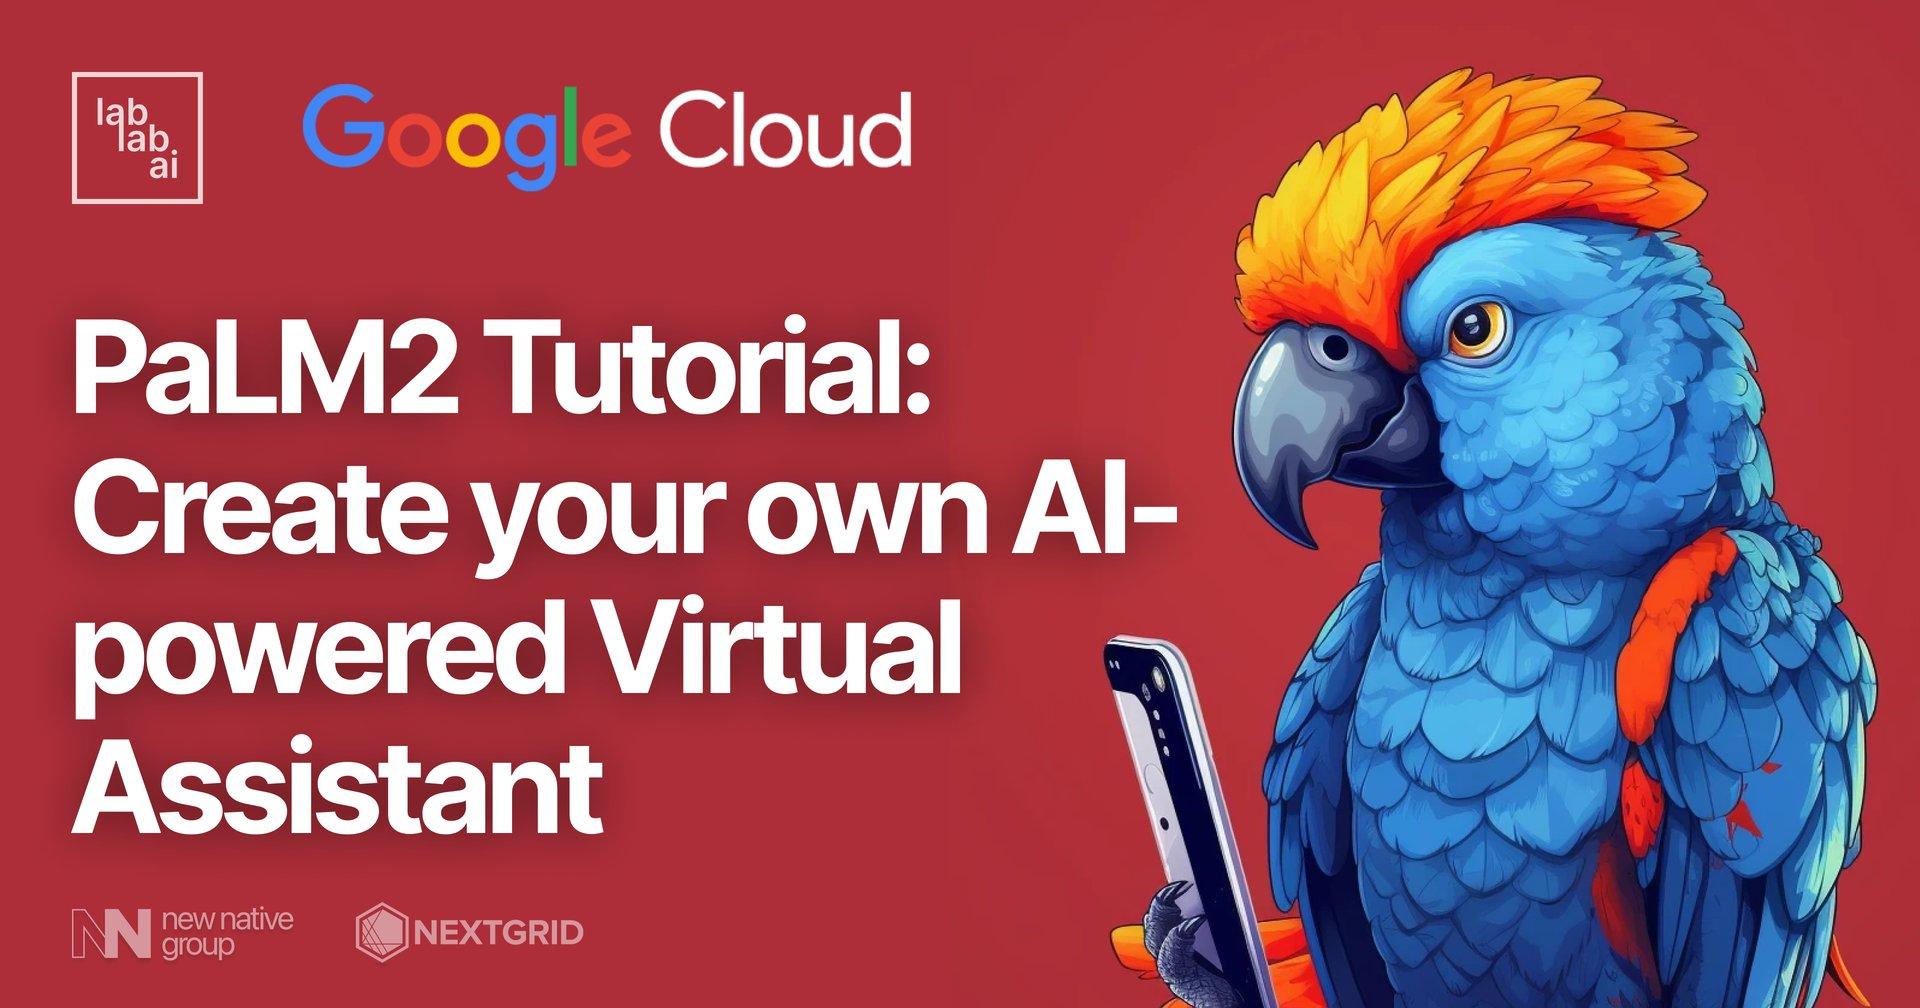 PaLM2 Tutorial: Create your own AI-powered Virtual Assistant